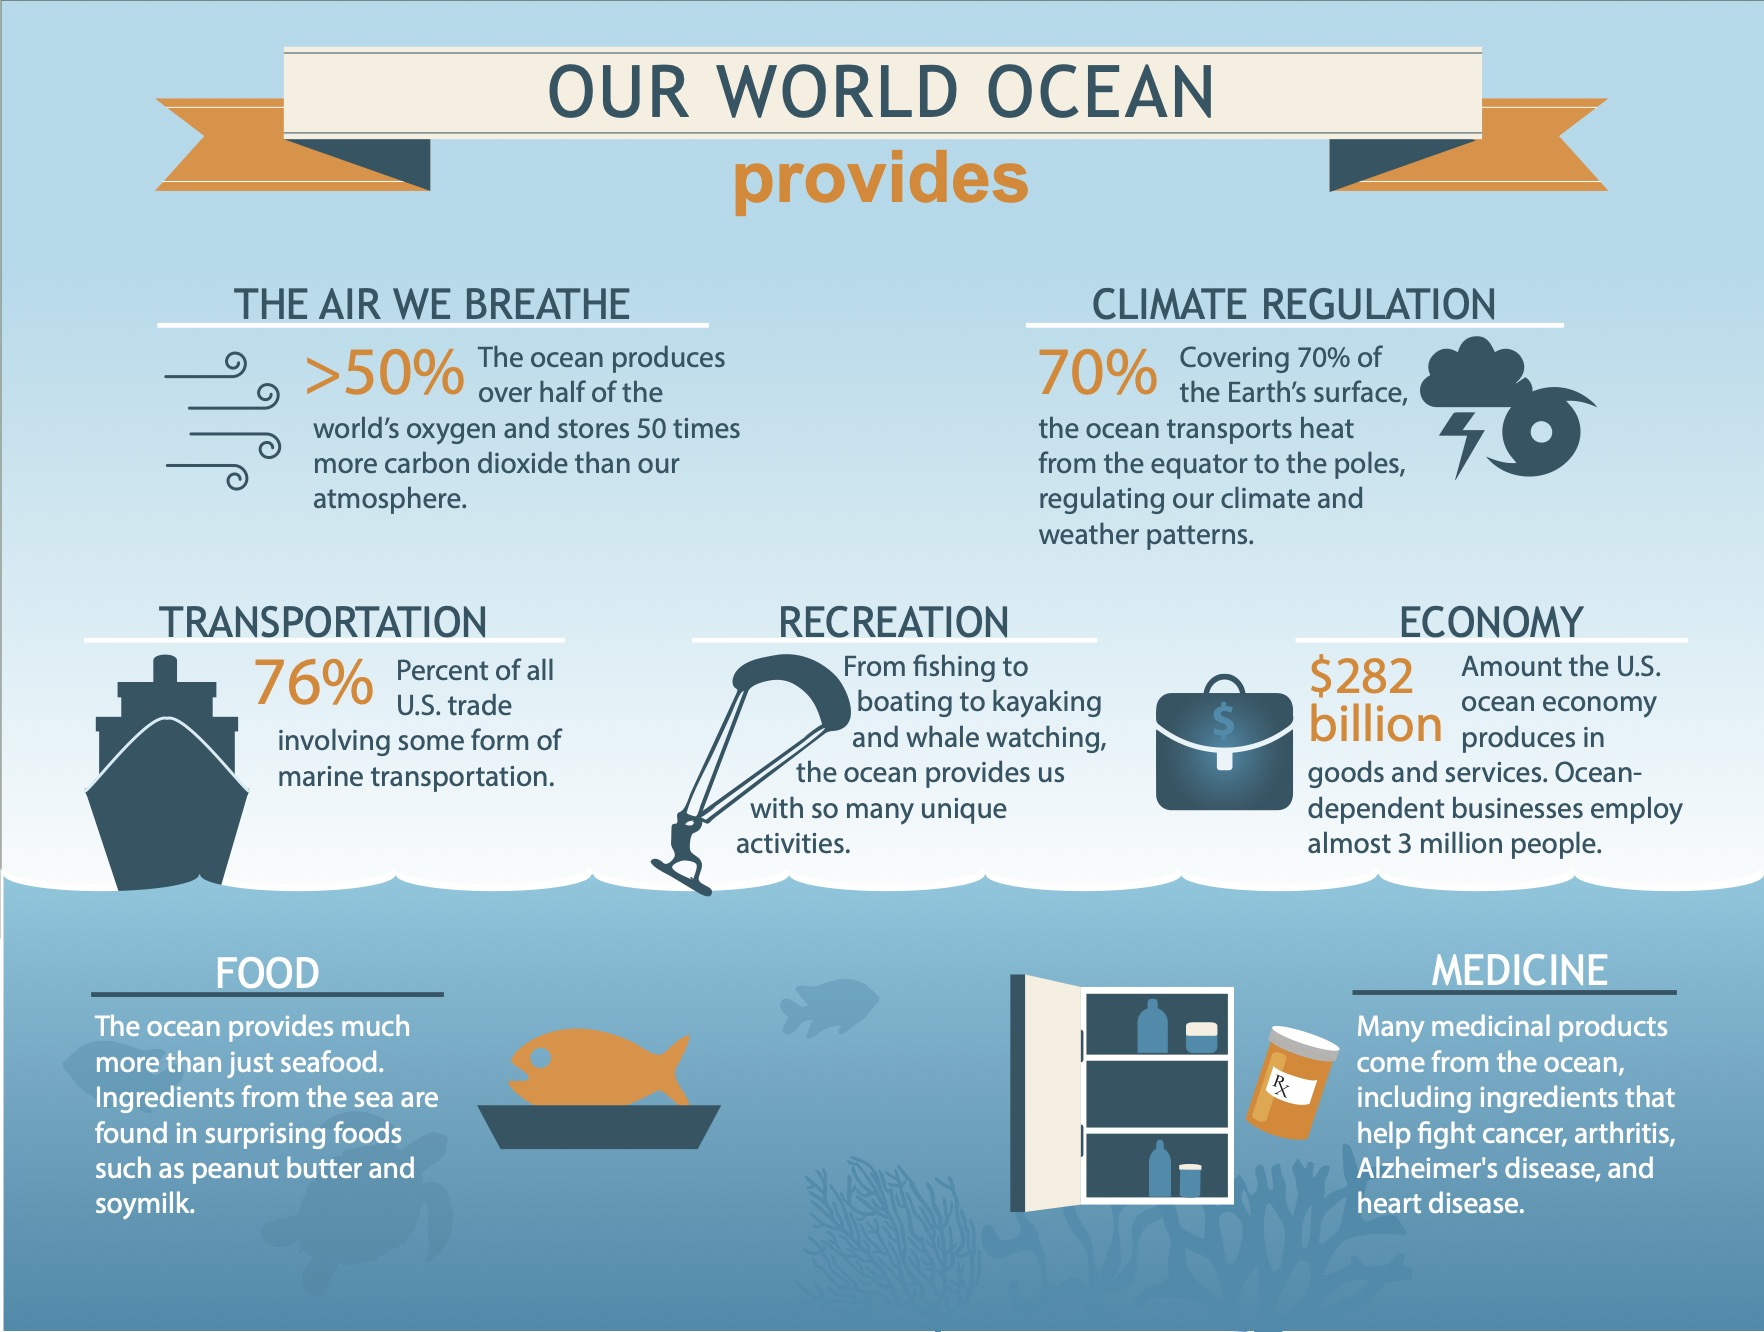 Infographic about the ocean's impact on oxygen, climate, transportation, recreation, economy, food, and medicine.